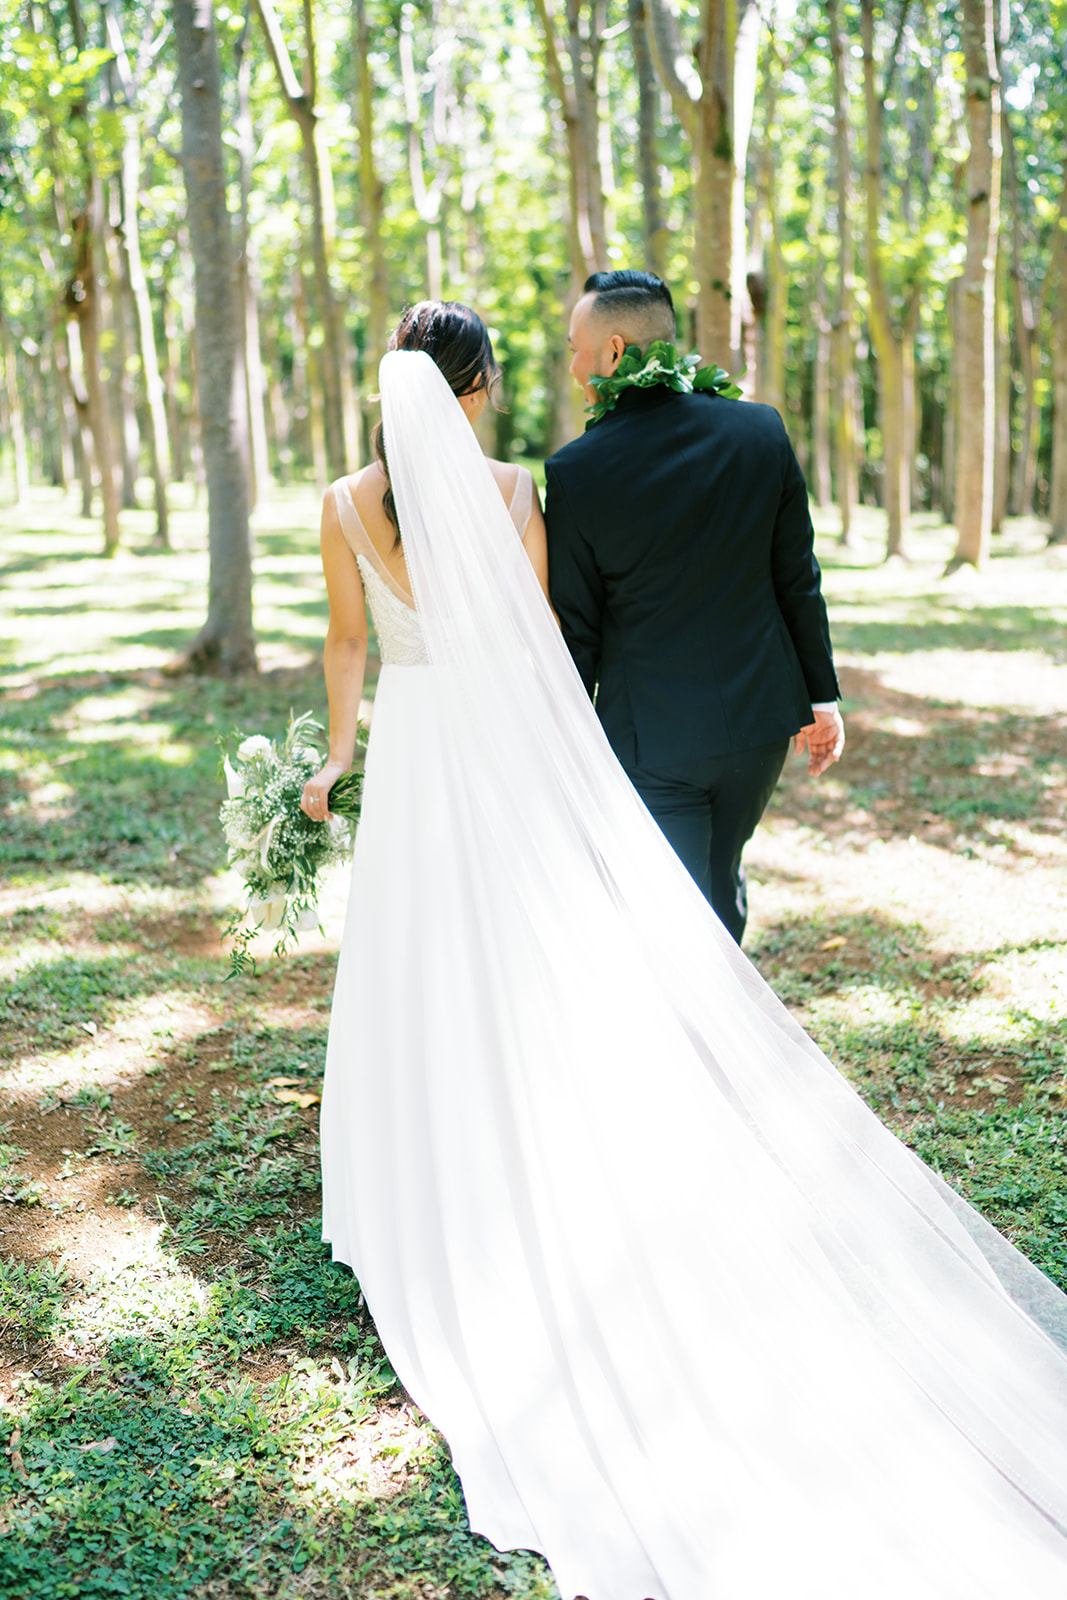 Bride and groom walking hand in hand through a forest captured by Oahu Wedding Photographer Megan Moura